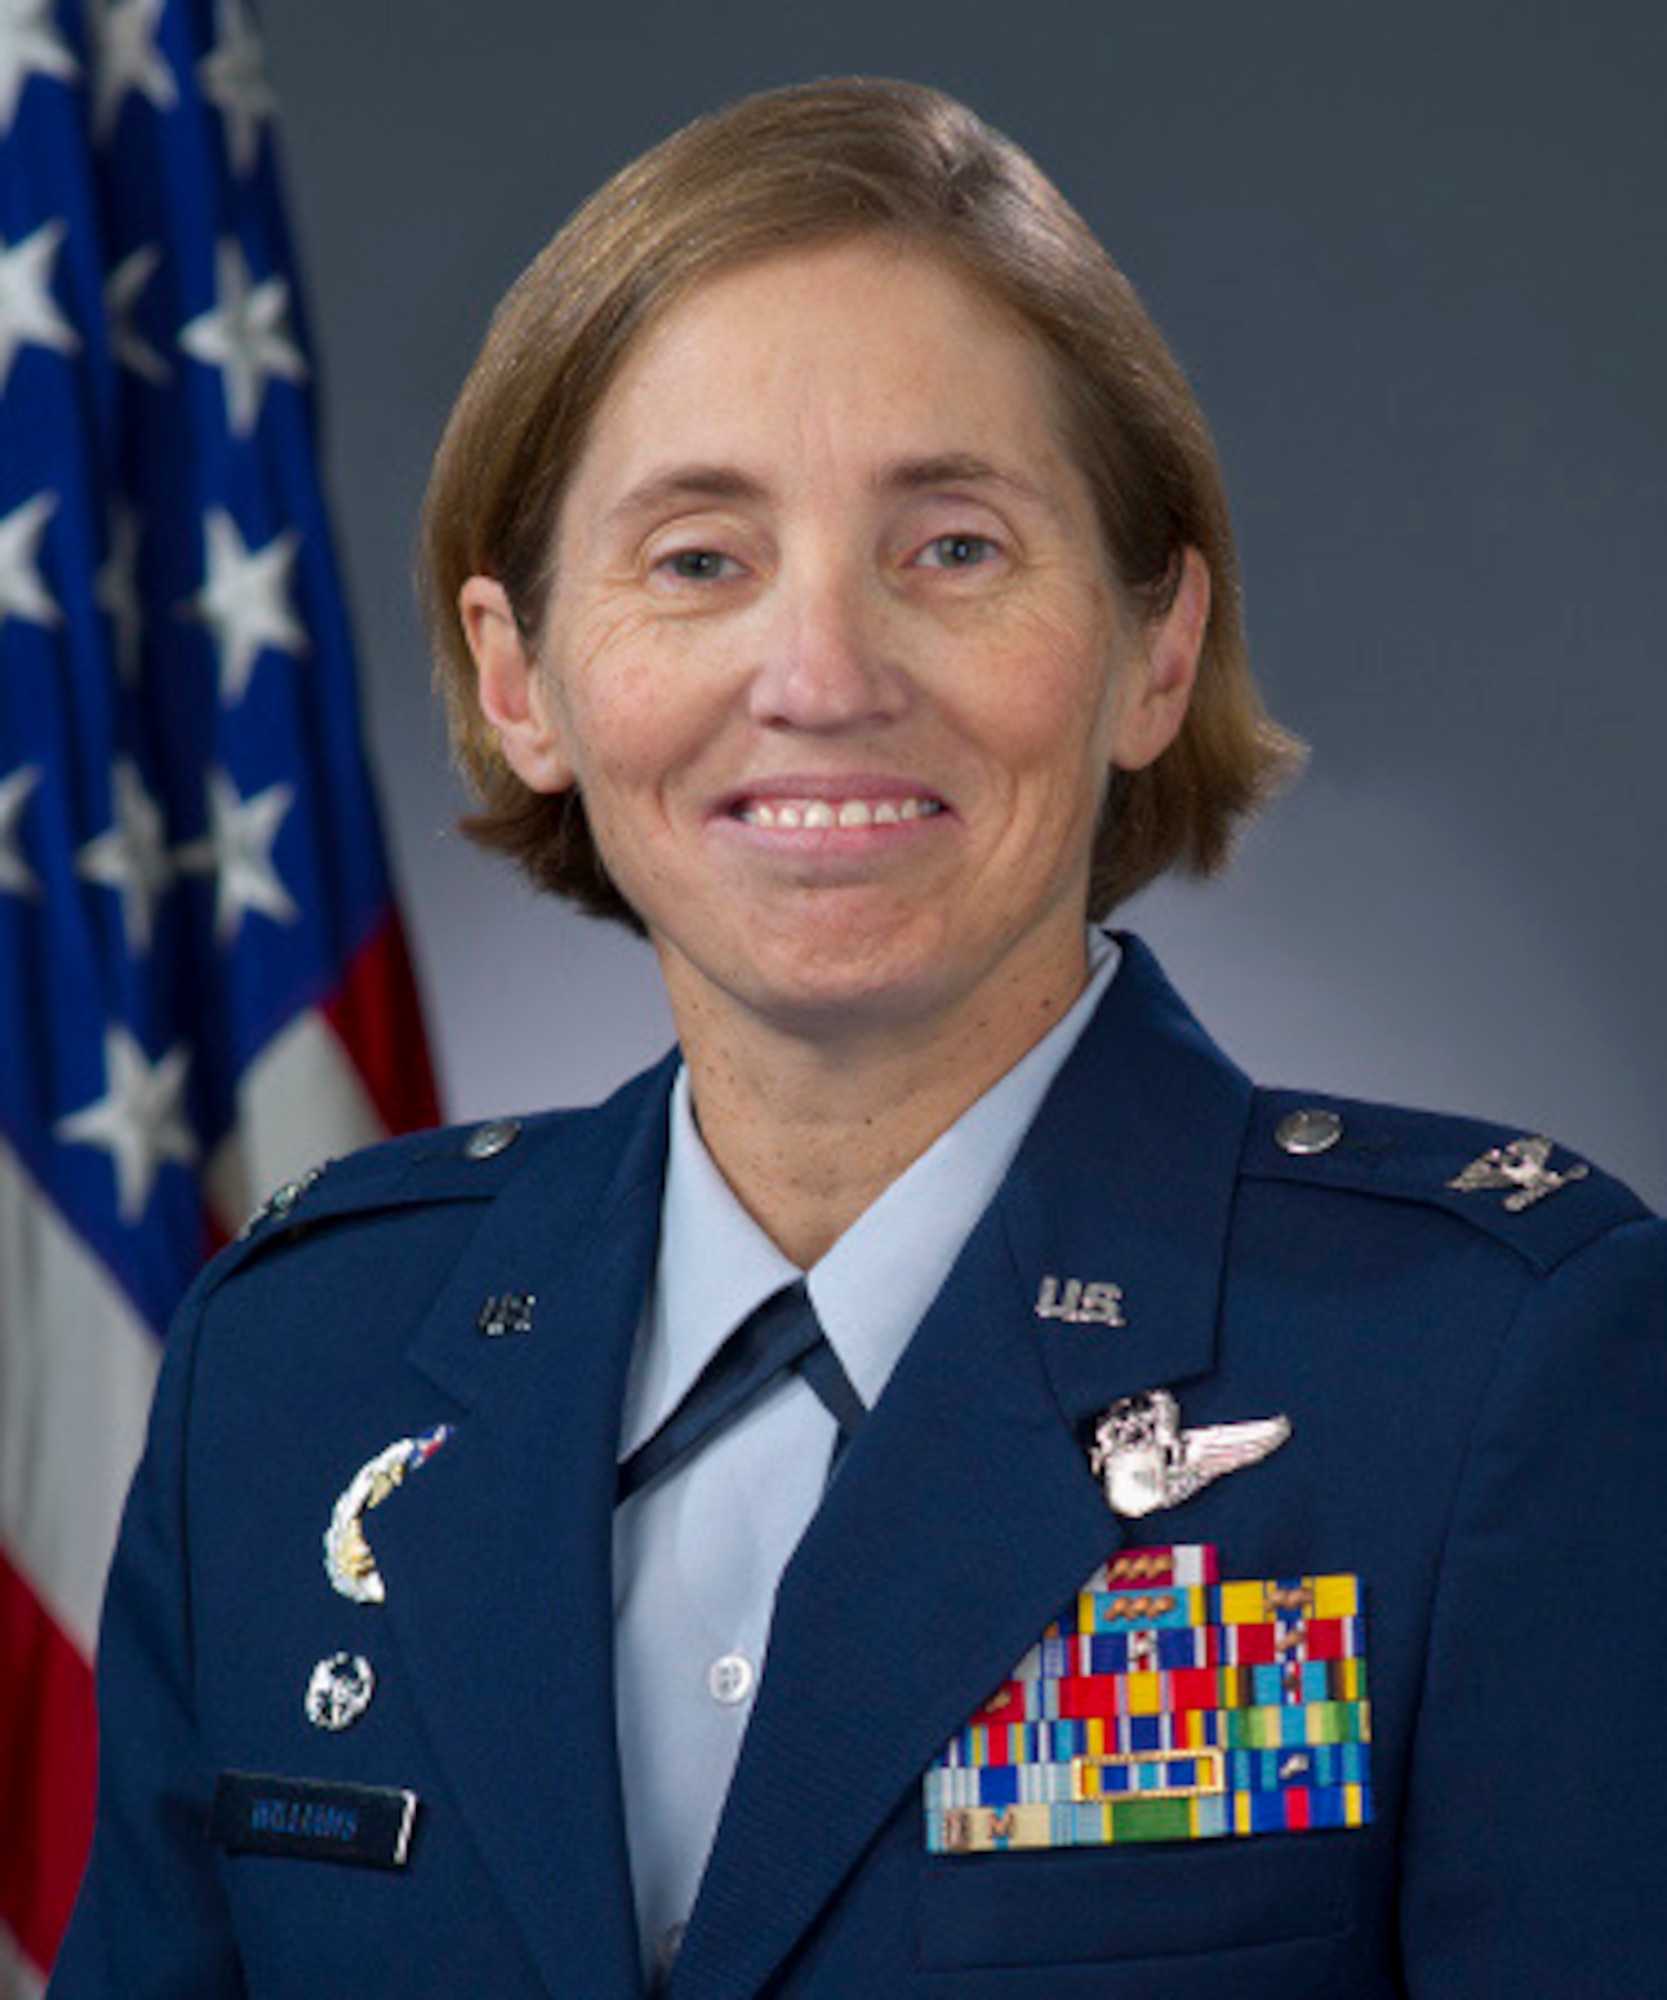 Col. Stephanie W. Williams, head of the 349th Operations Group at Travis Air Force Base, California, will be the next commander of the 940th Air Refueling Wing.